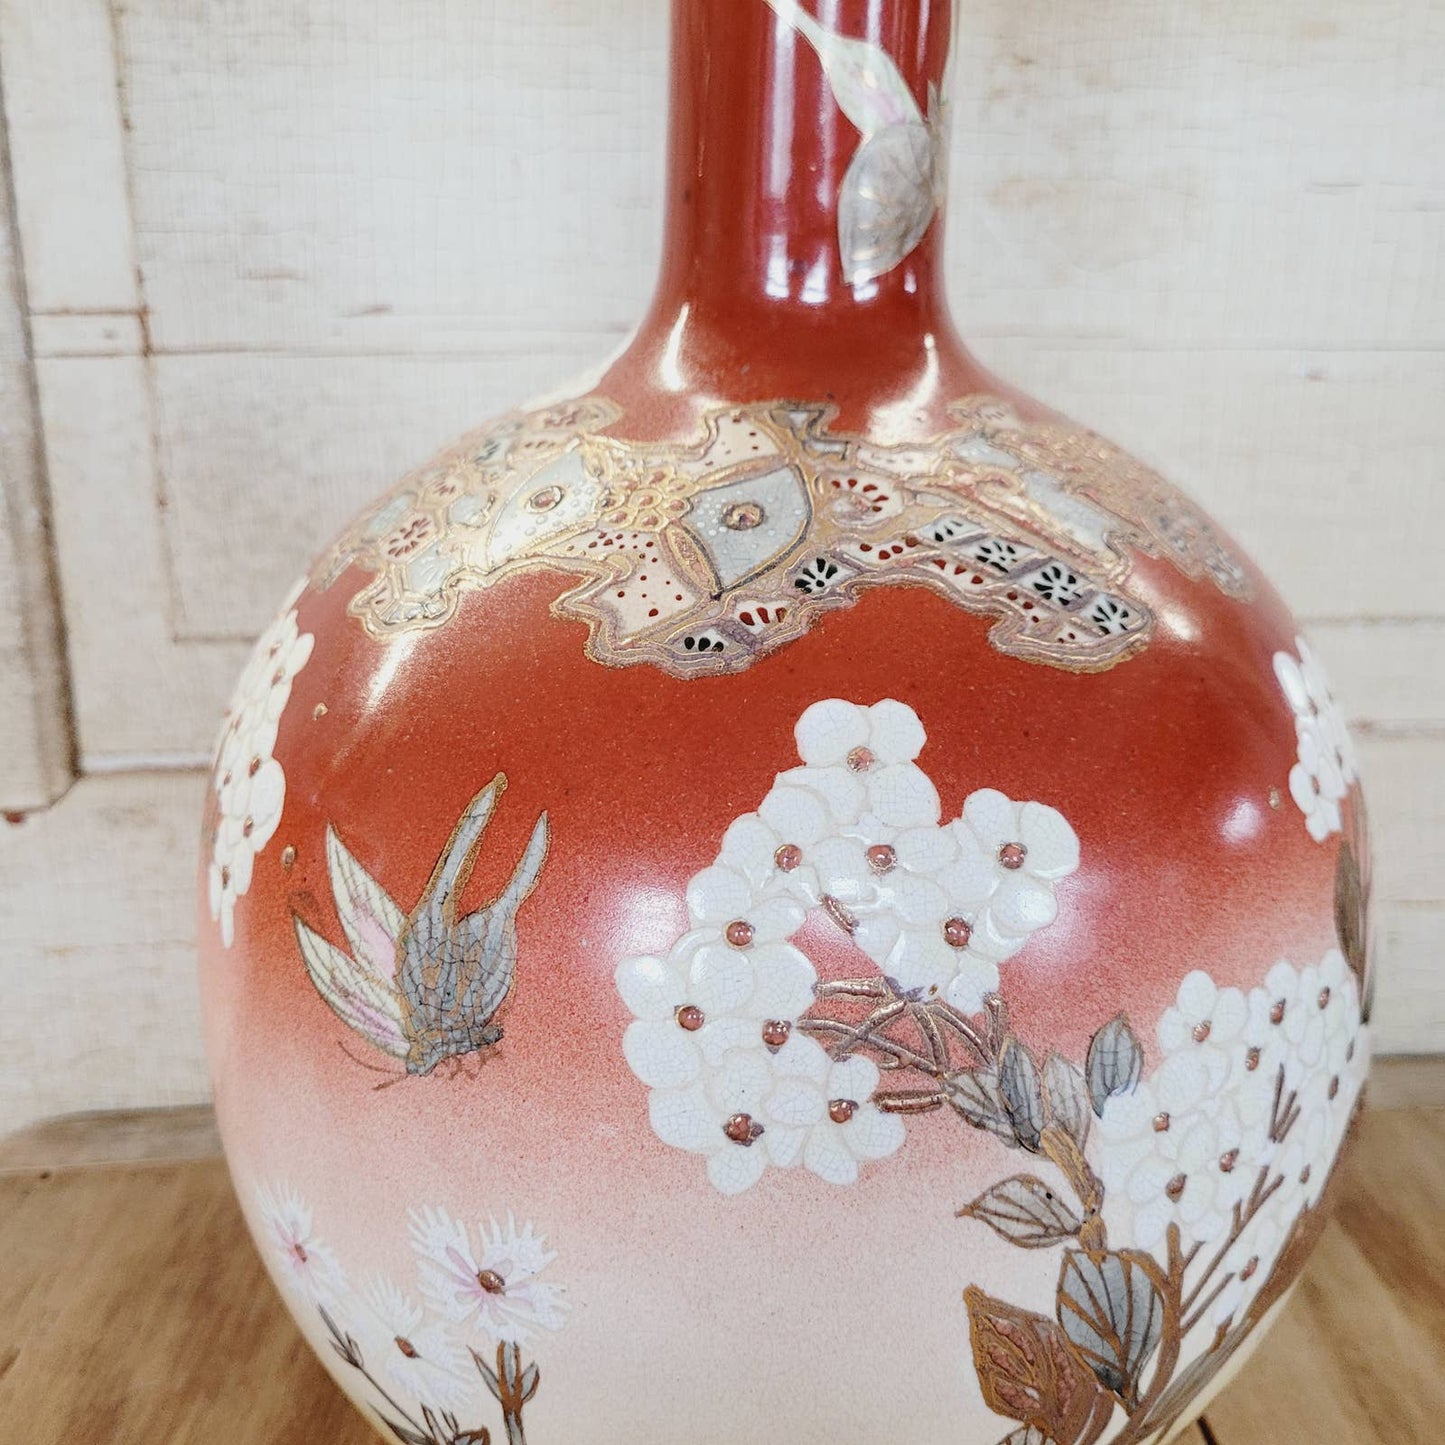 Antique Japanese Porcelain Vase with Butterflies and Blossoms